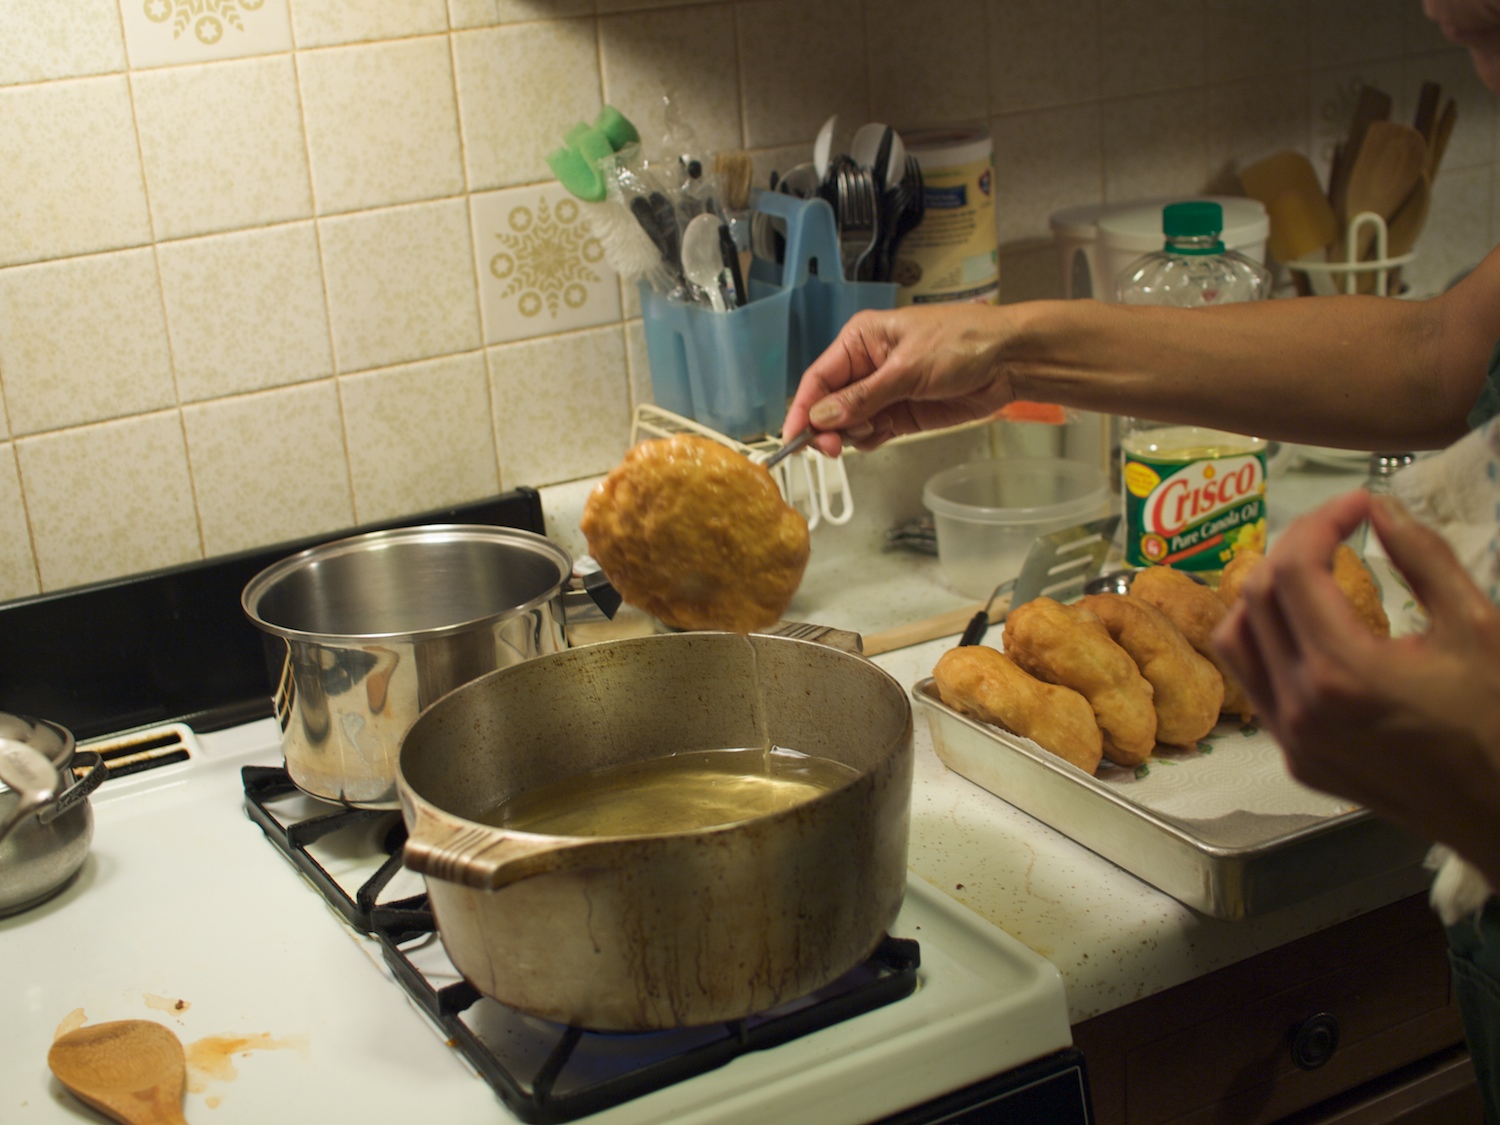 Federal court dismisses lawsuit over fry bread incident at Indian school